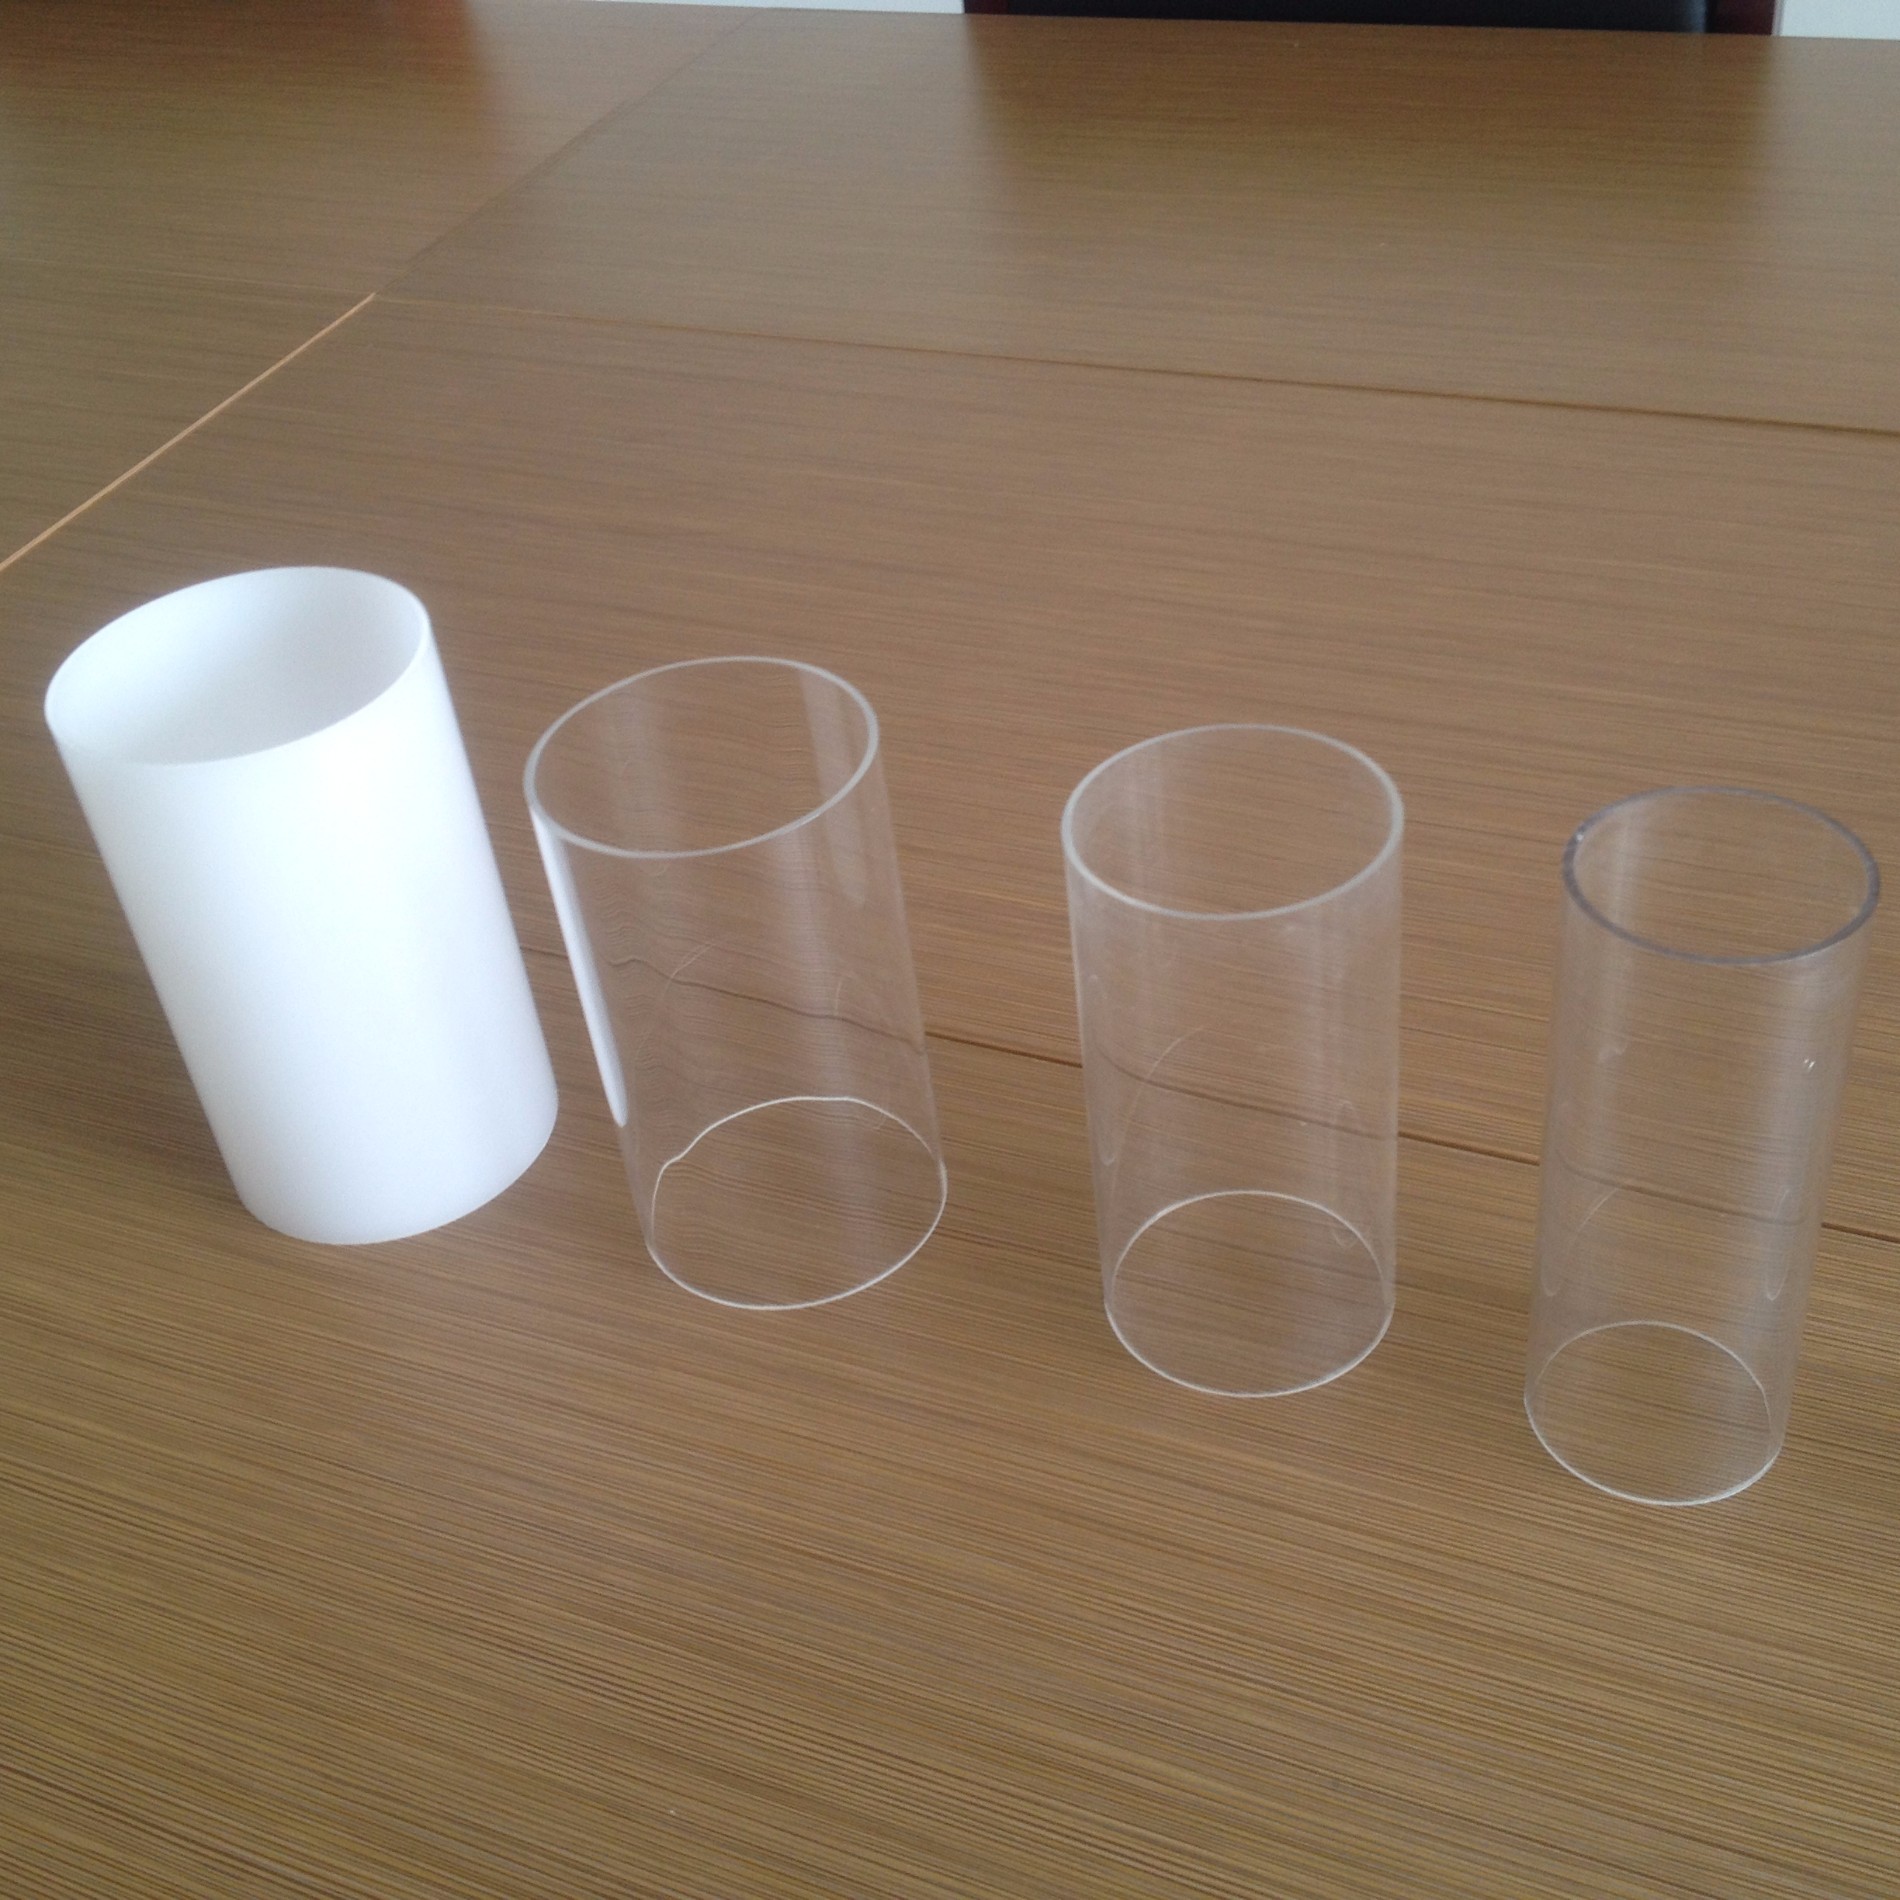 100% virgin transparent clear acrylic square tube